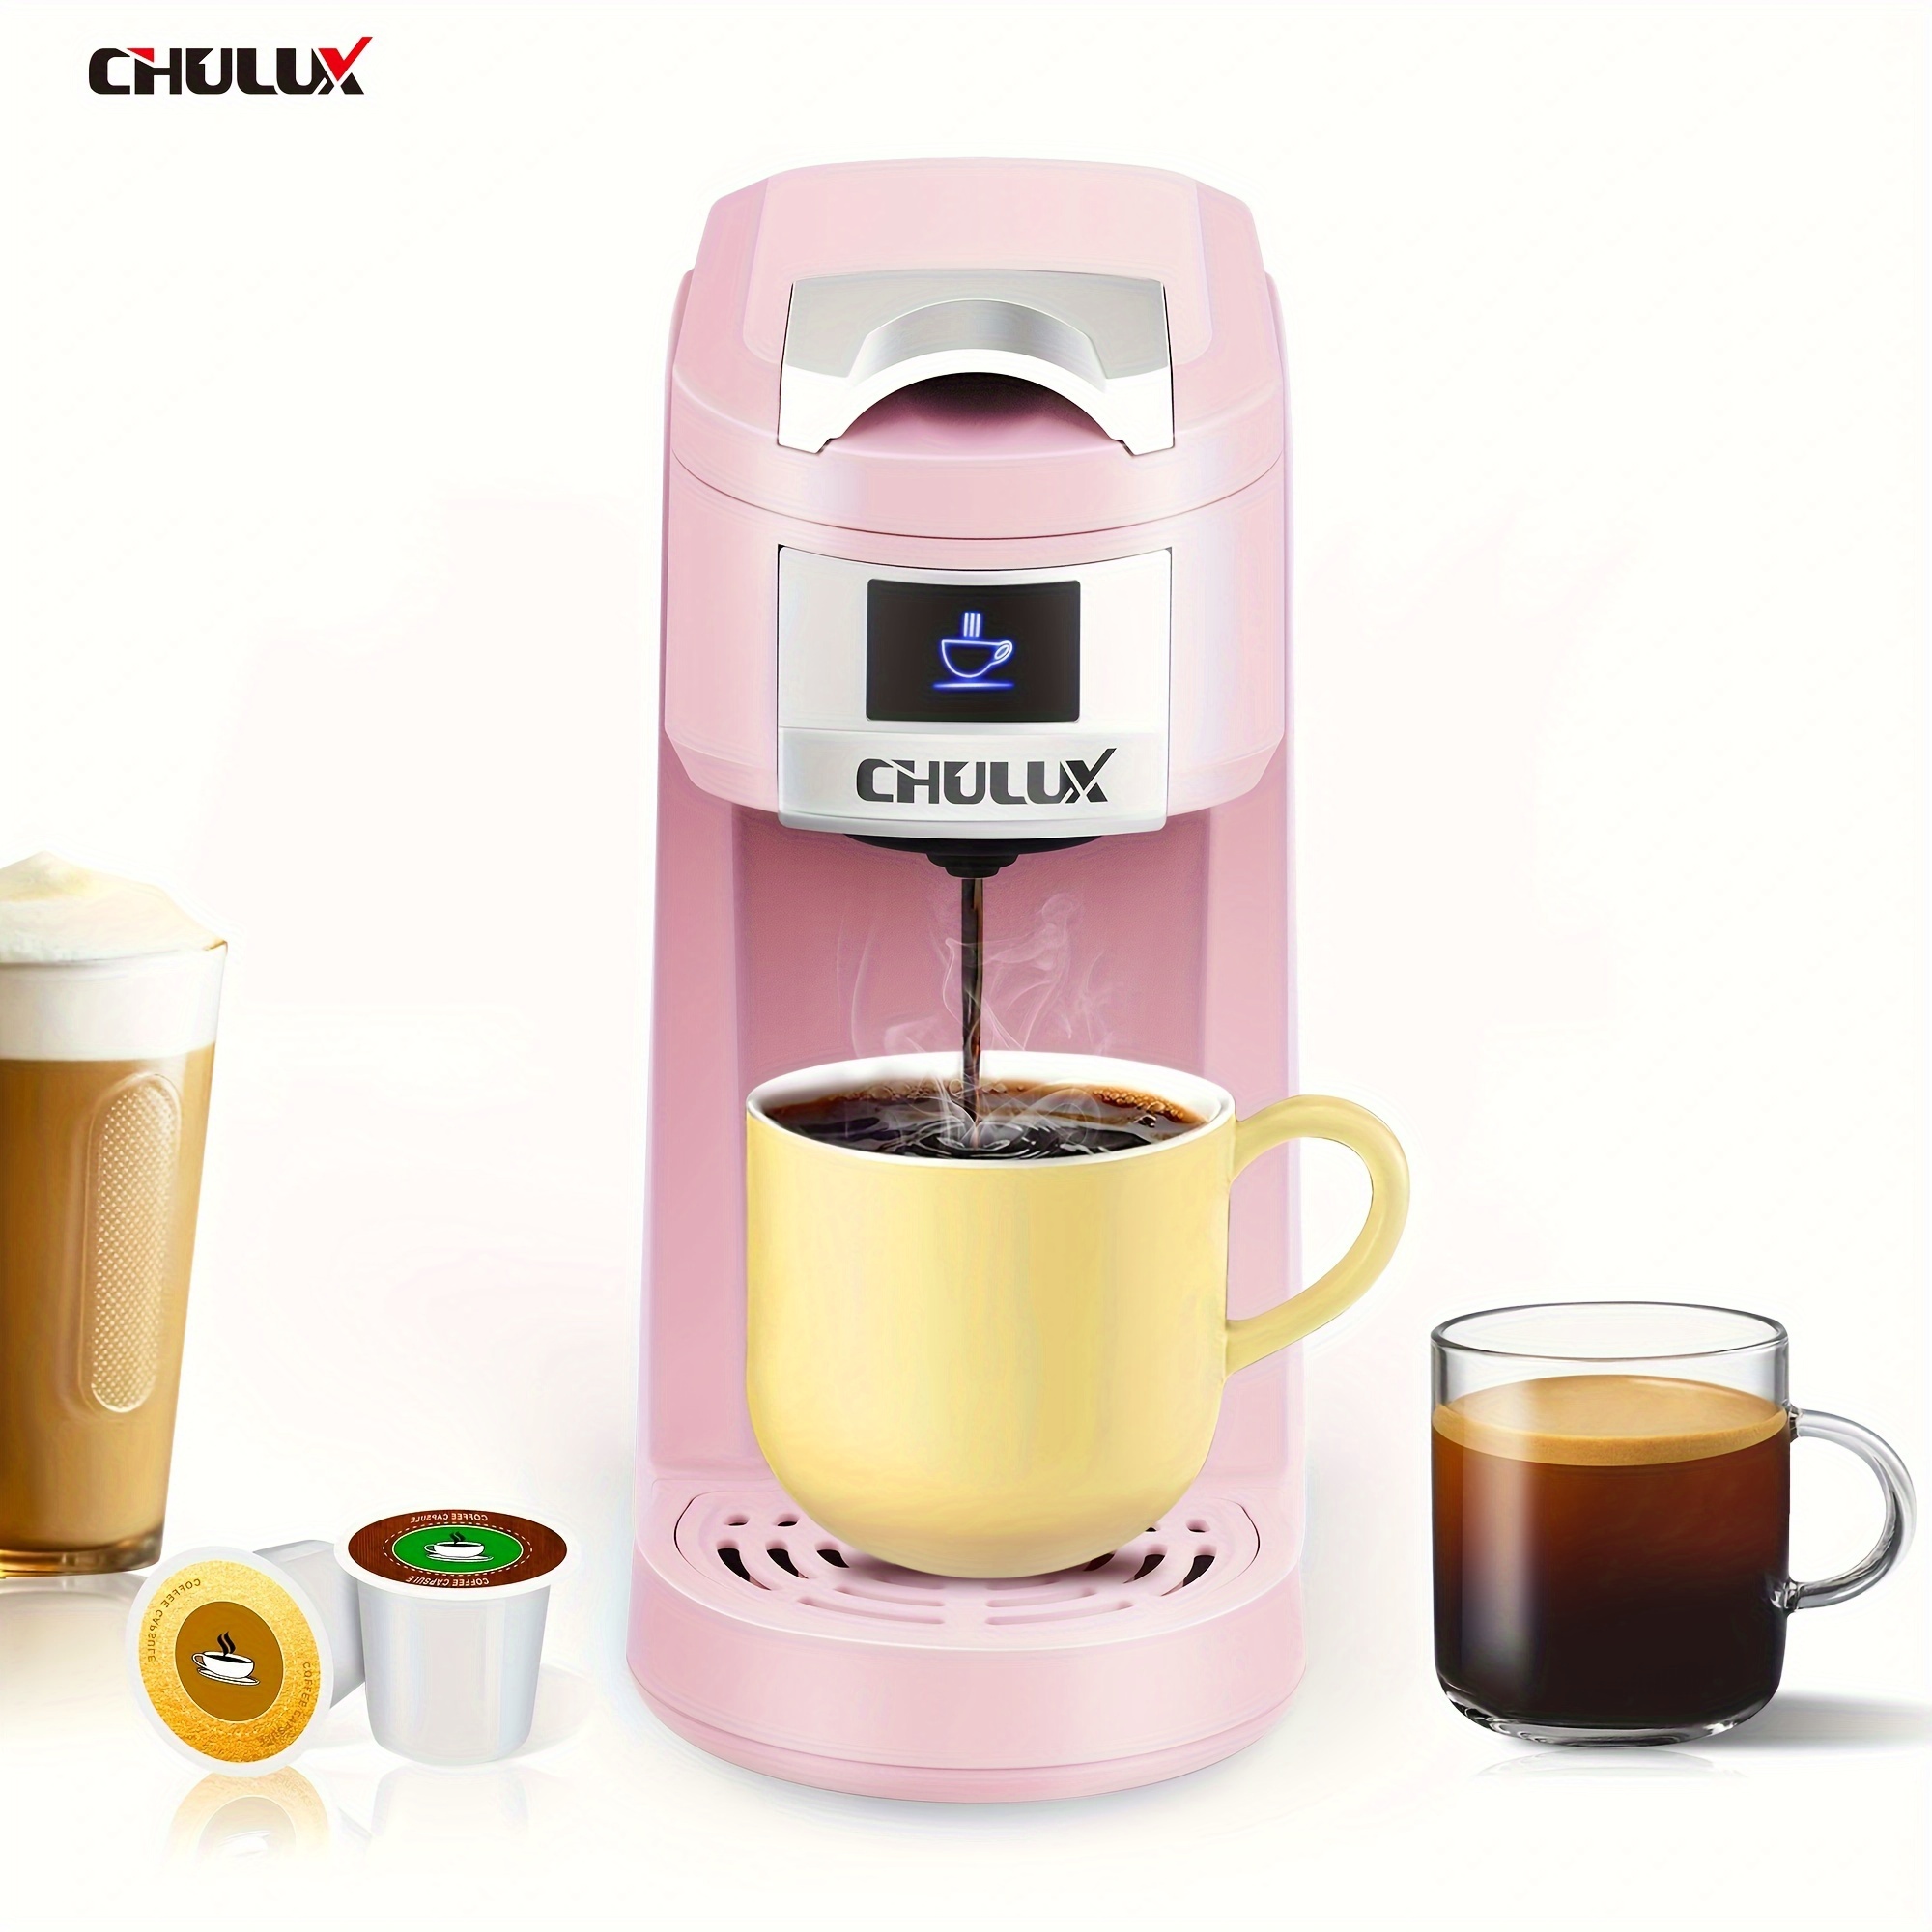 

Upgrade Single Serve Coffee Maker For K Cup & Ground Coffee, Mini Single Cup Coffee Machine With 1 Touch Function, Fast Brewing In Minutes, Pink